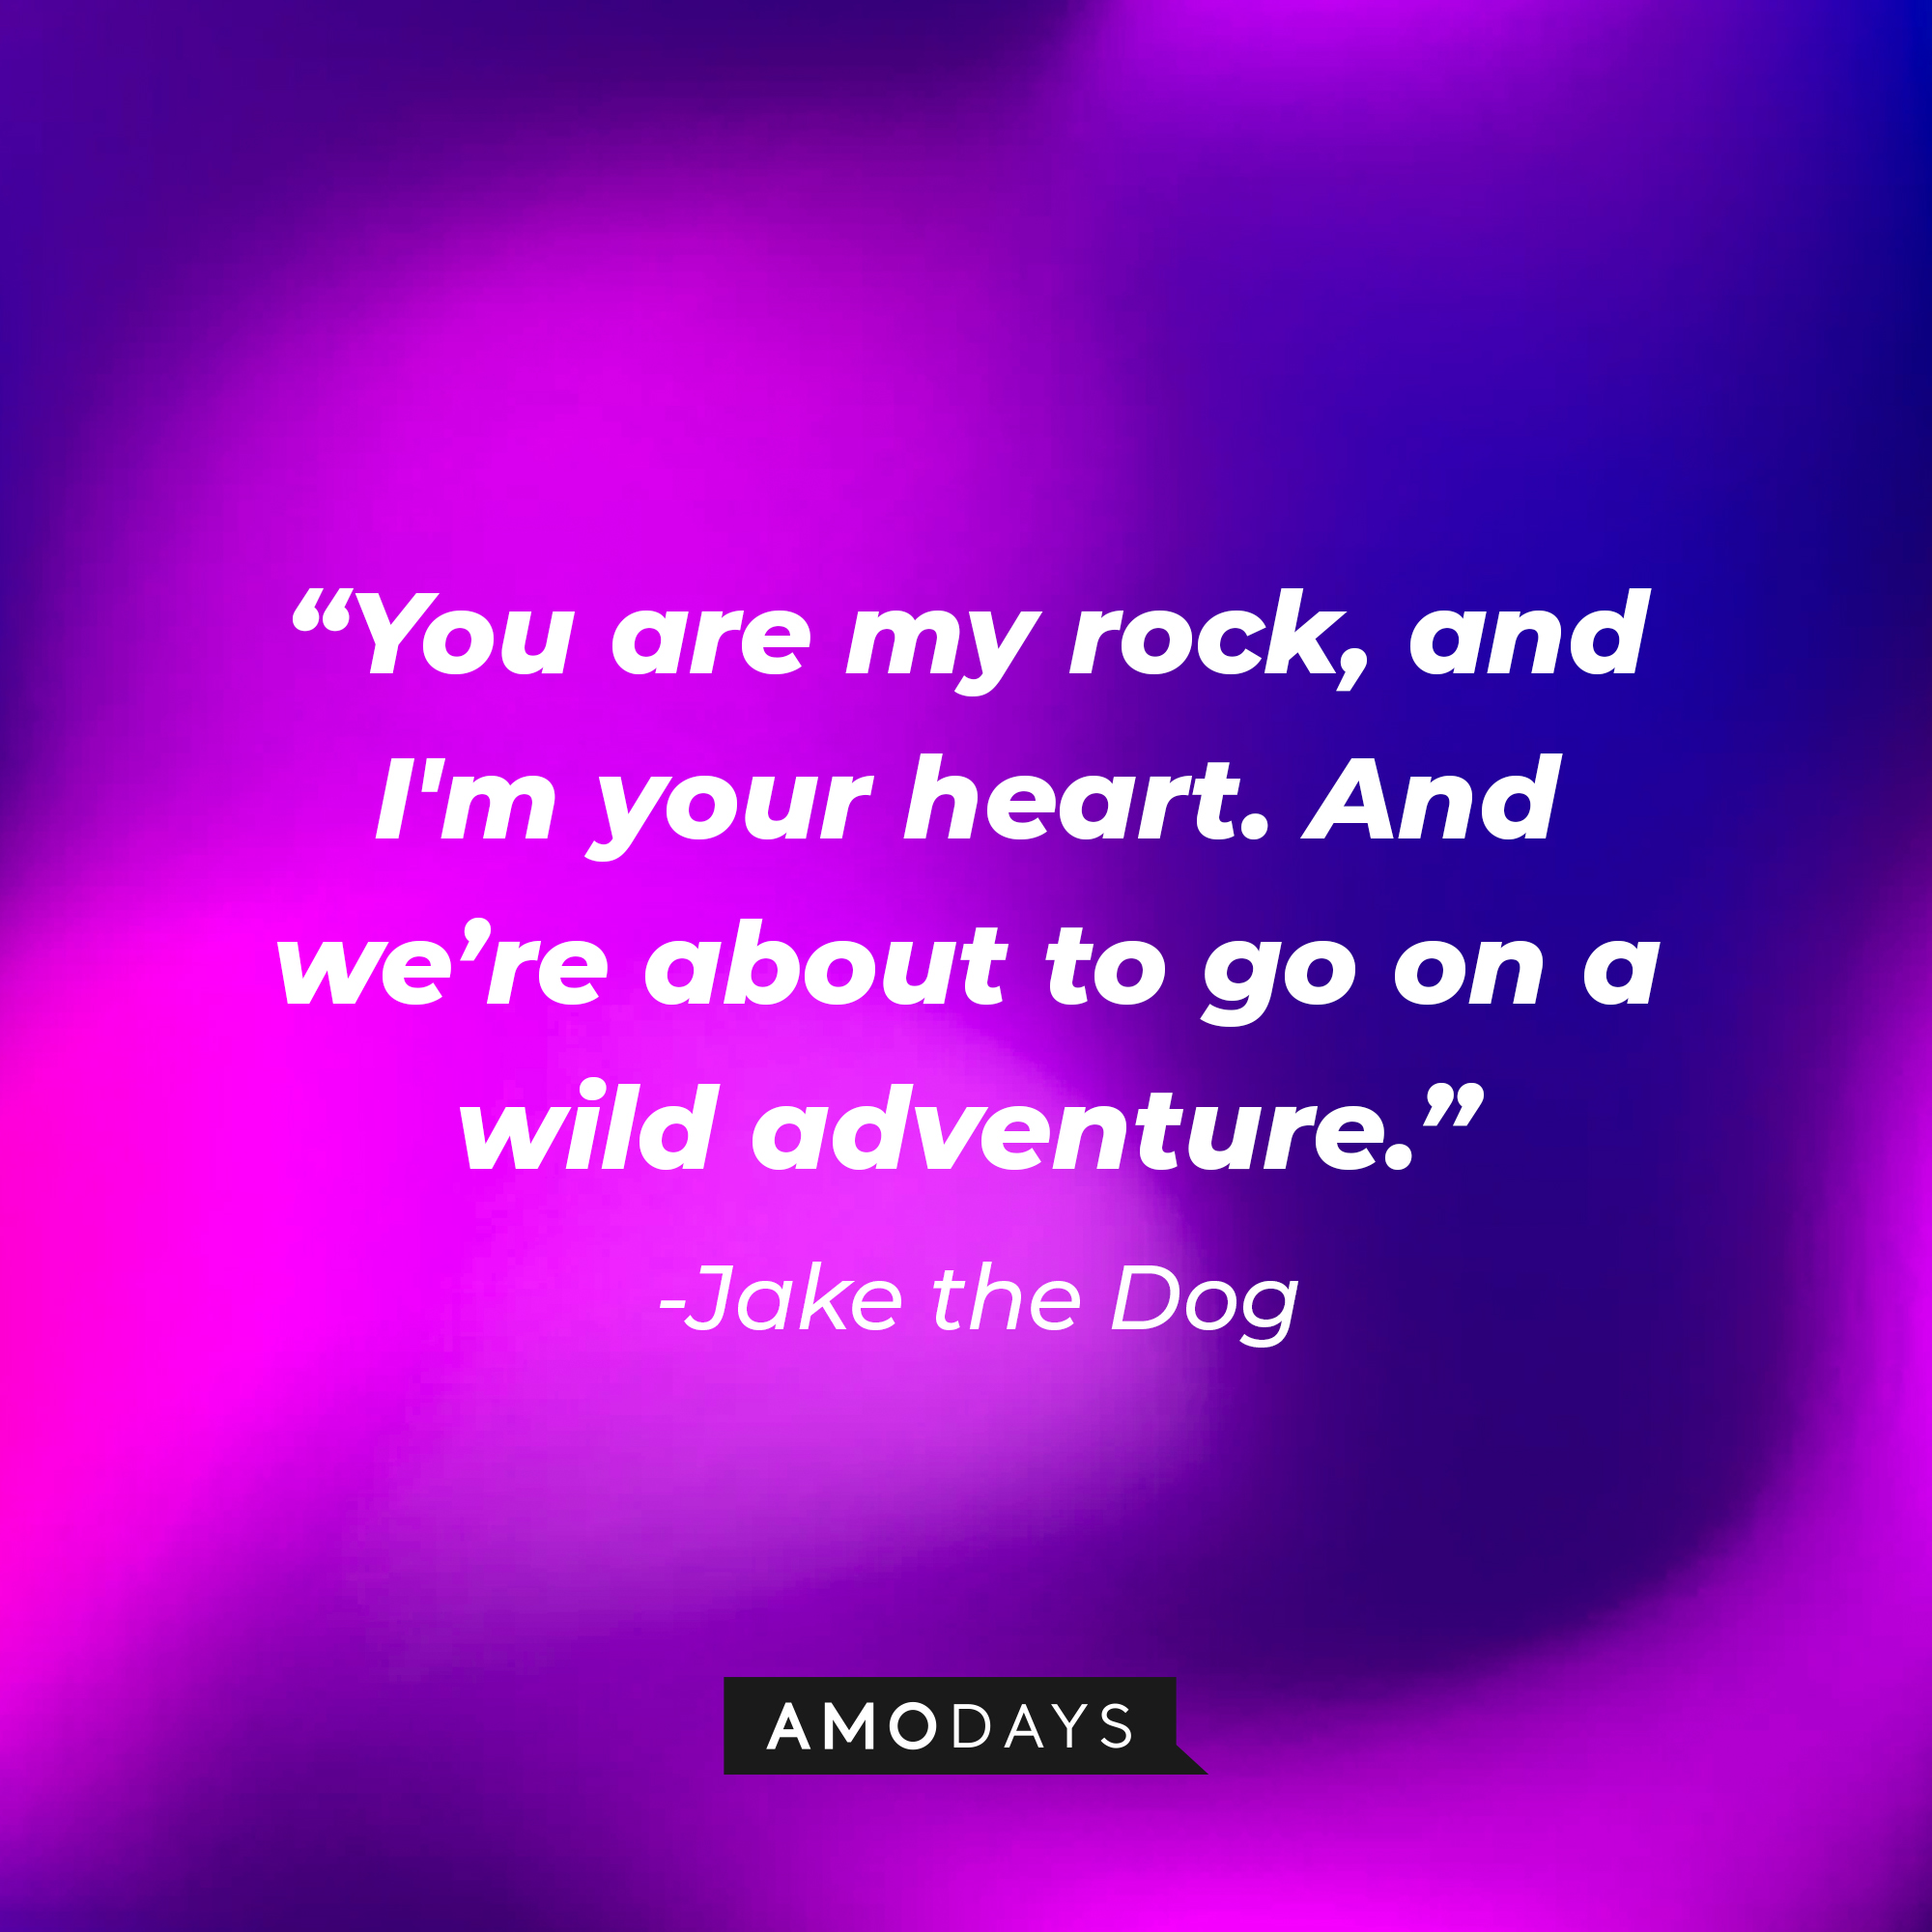 Jake the Dog’s quote:  “You are my rock, and I'm your heart. And we’re about to go on a wild adventure.”  | Source: AmoDays